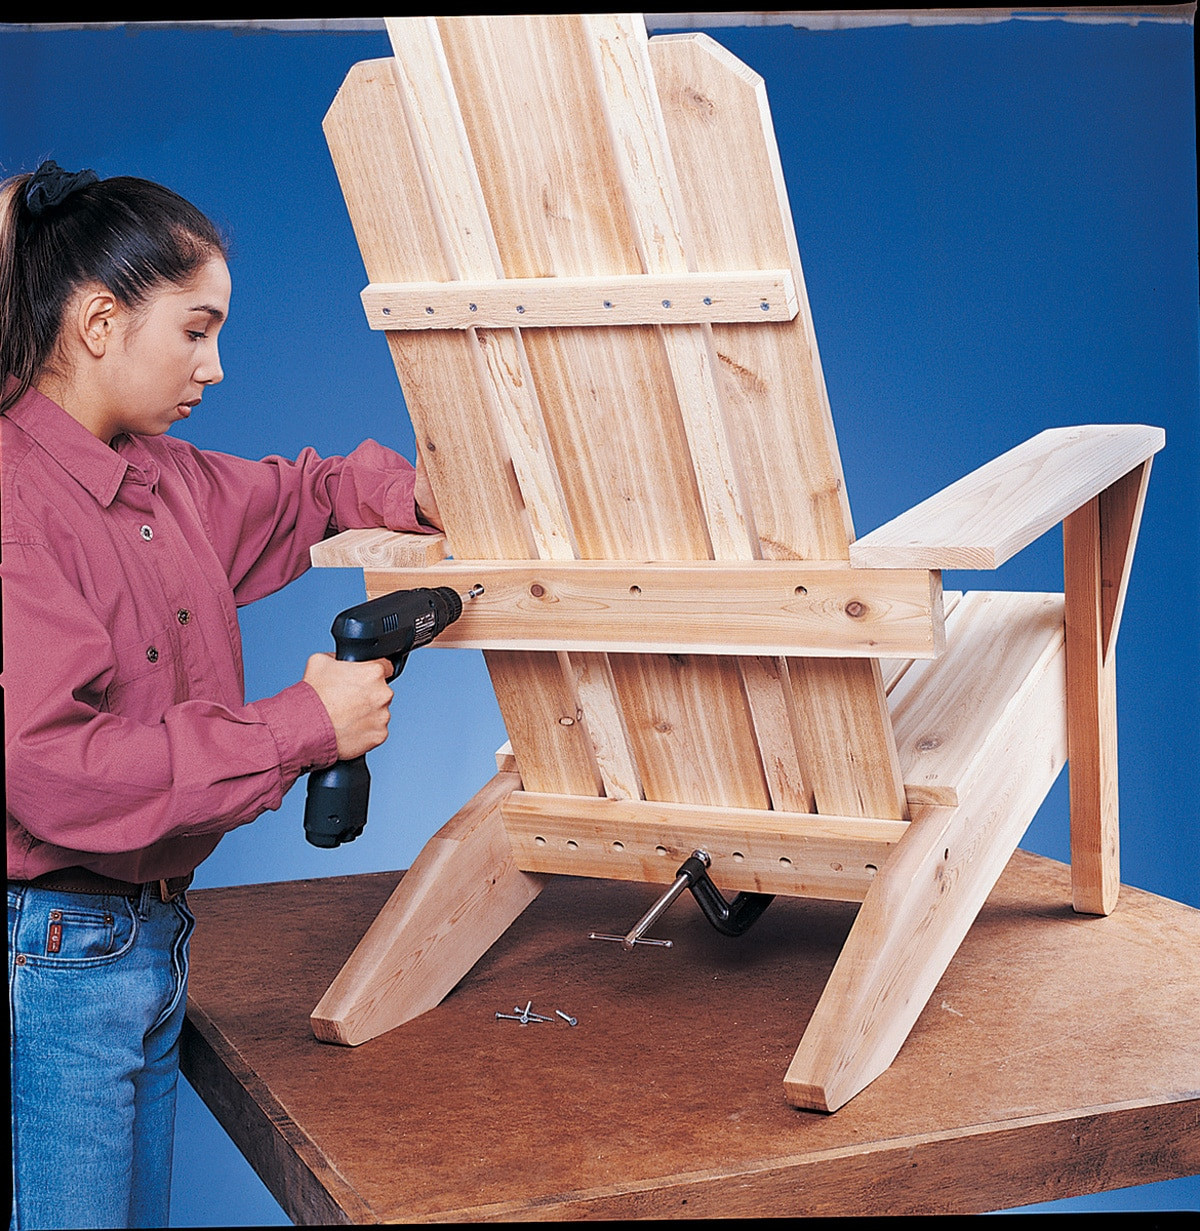 The 23 Best Ideas for Diy Adirondack Chair Kit - Home 